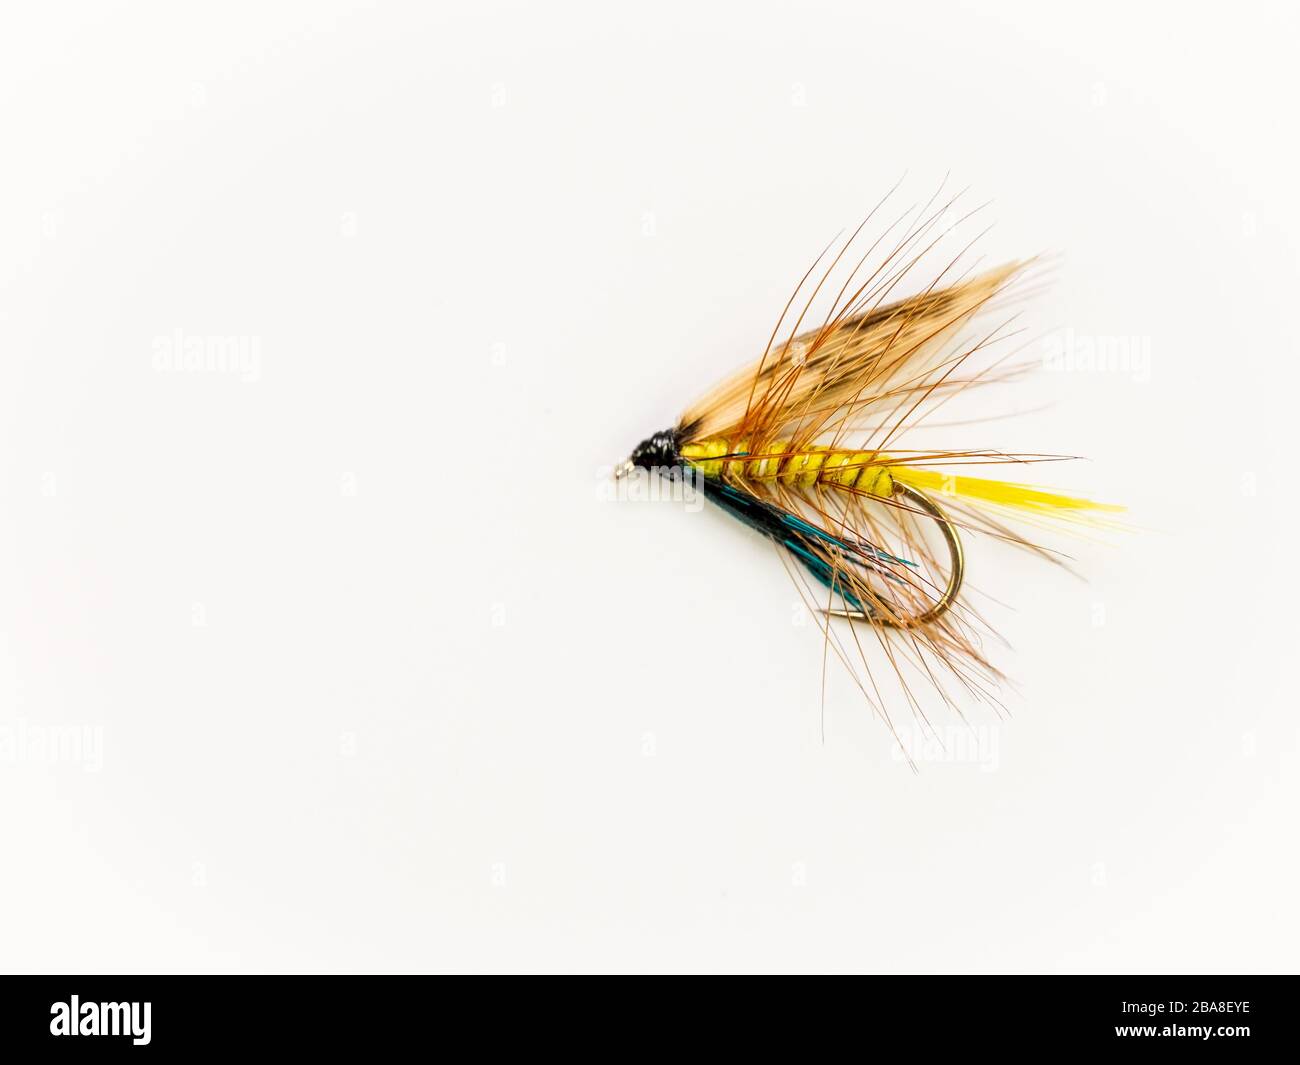 Traditional Wet Fly fishing fly for trout, Invicta Stock Photo - Alamy